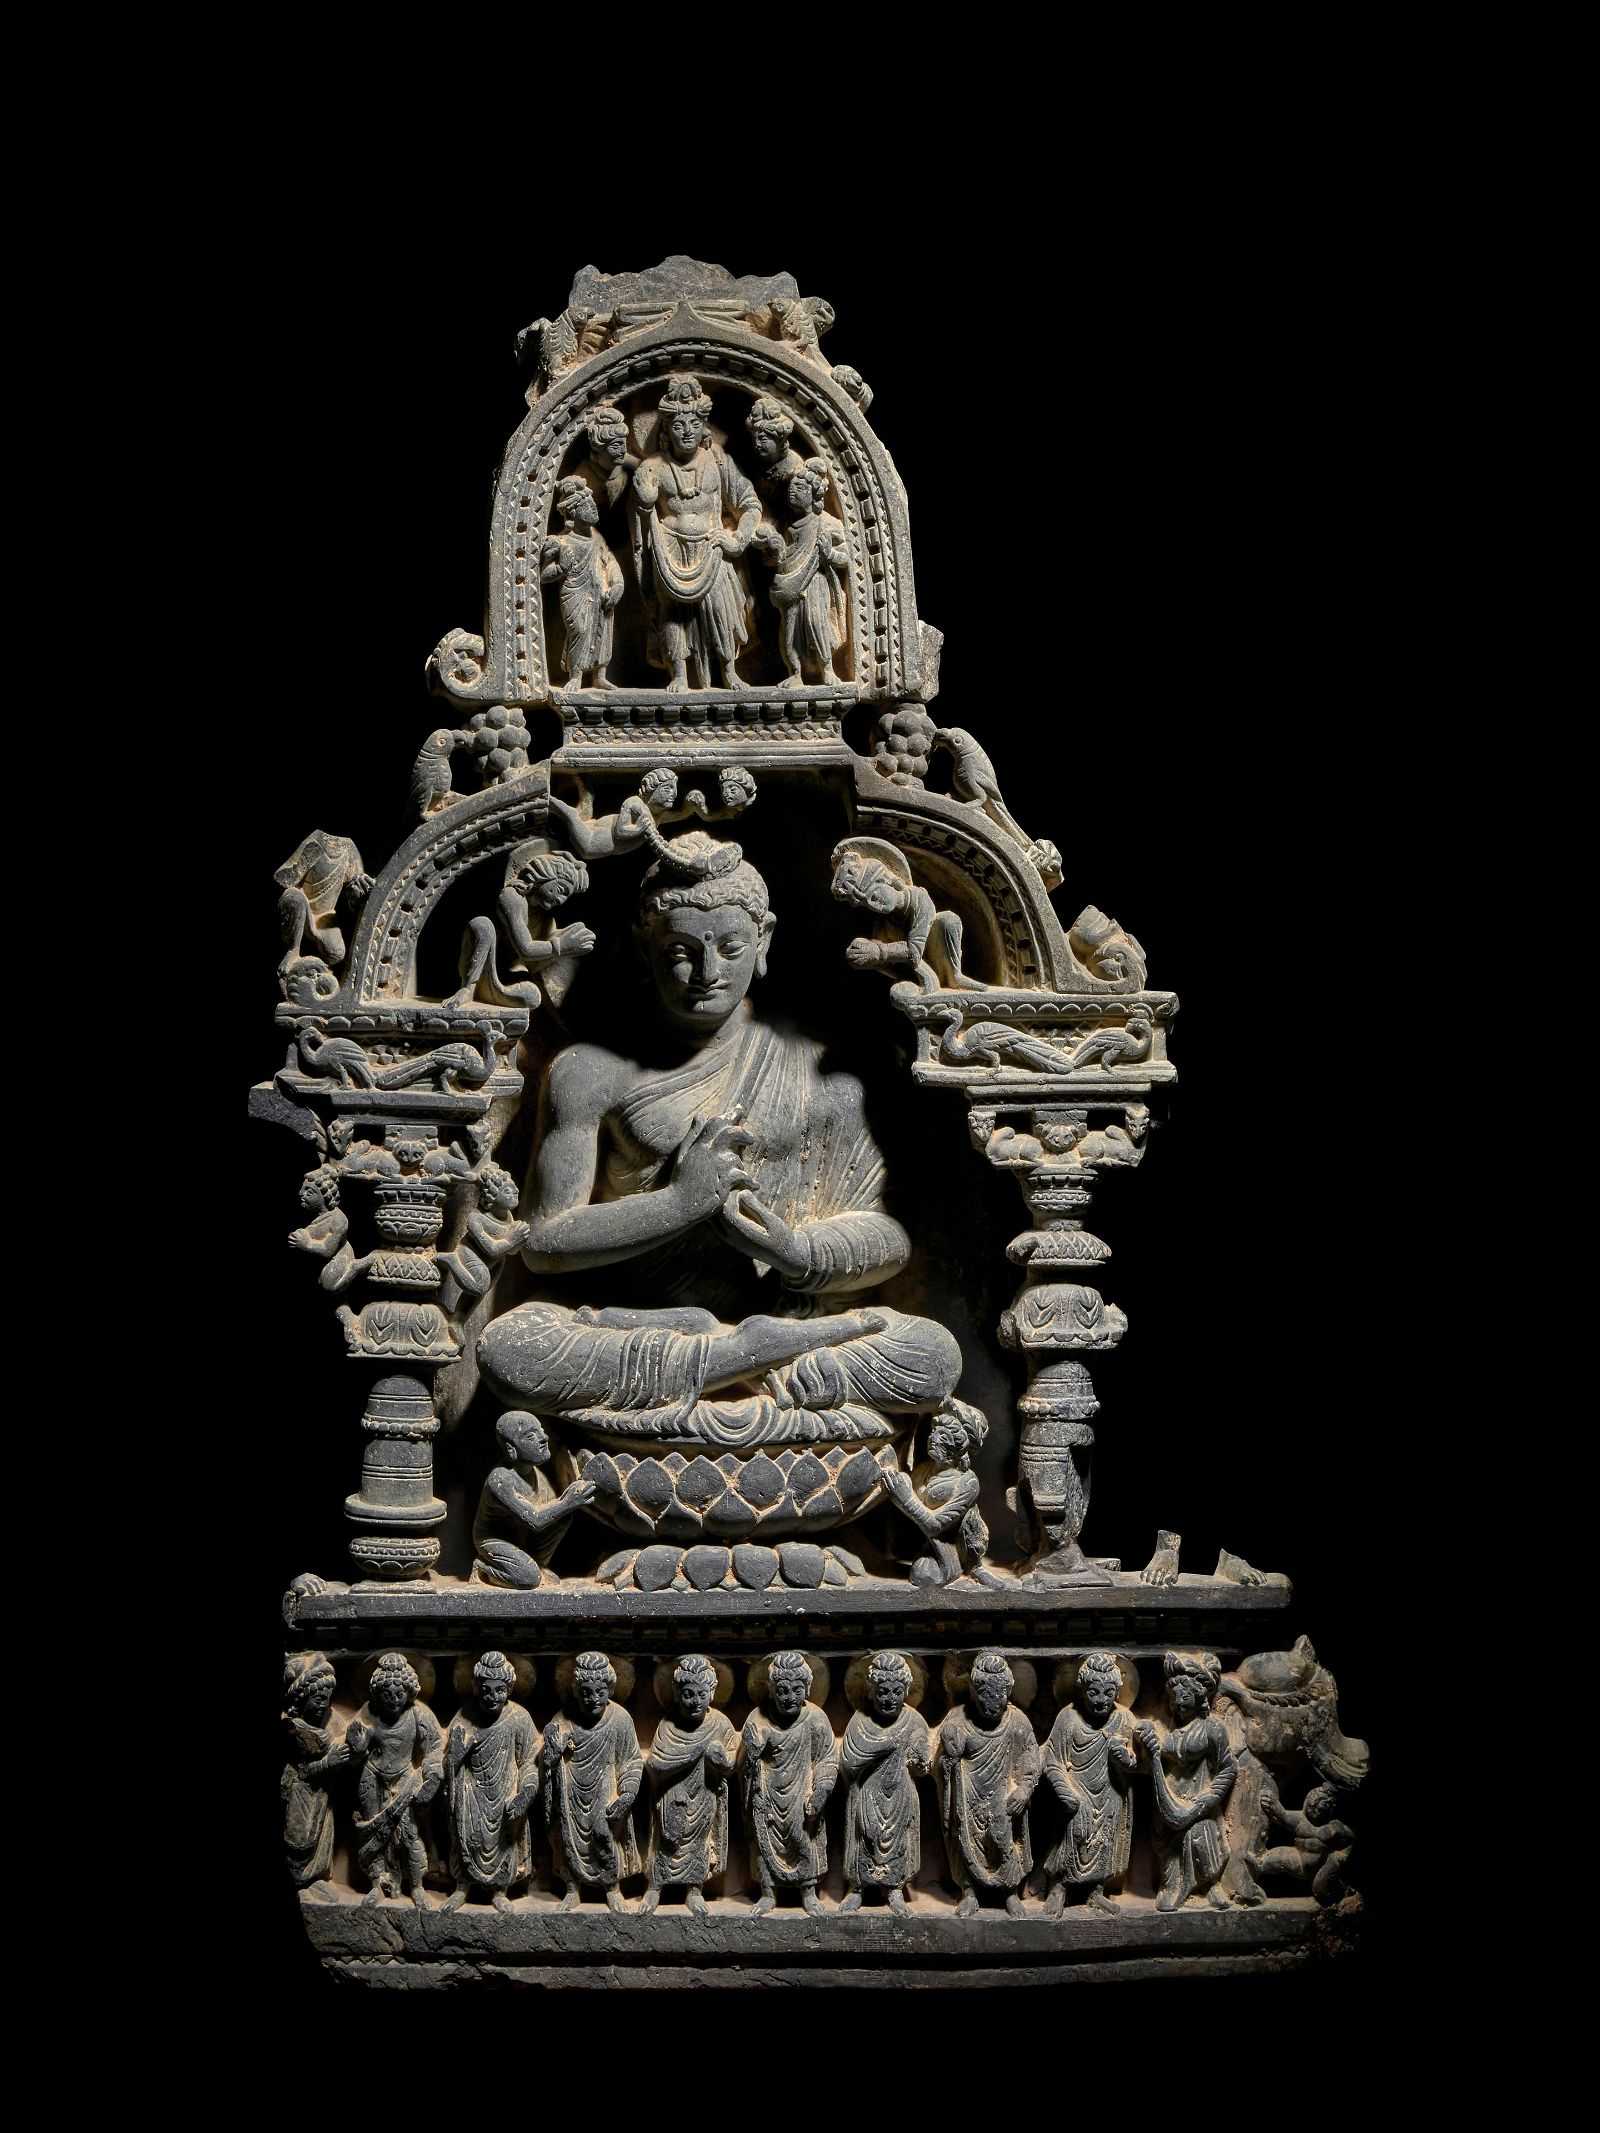 Gandharan schist gable relief of the Teaching Buddha, which hammered for $850,000 and sold for $1 million with buyer's premium at Bonhams’ March 20 sale of Indian, Himalayan & Southeast Asian Art.